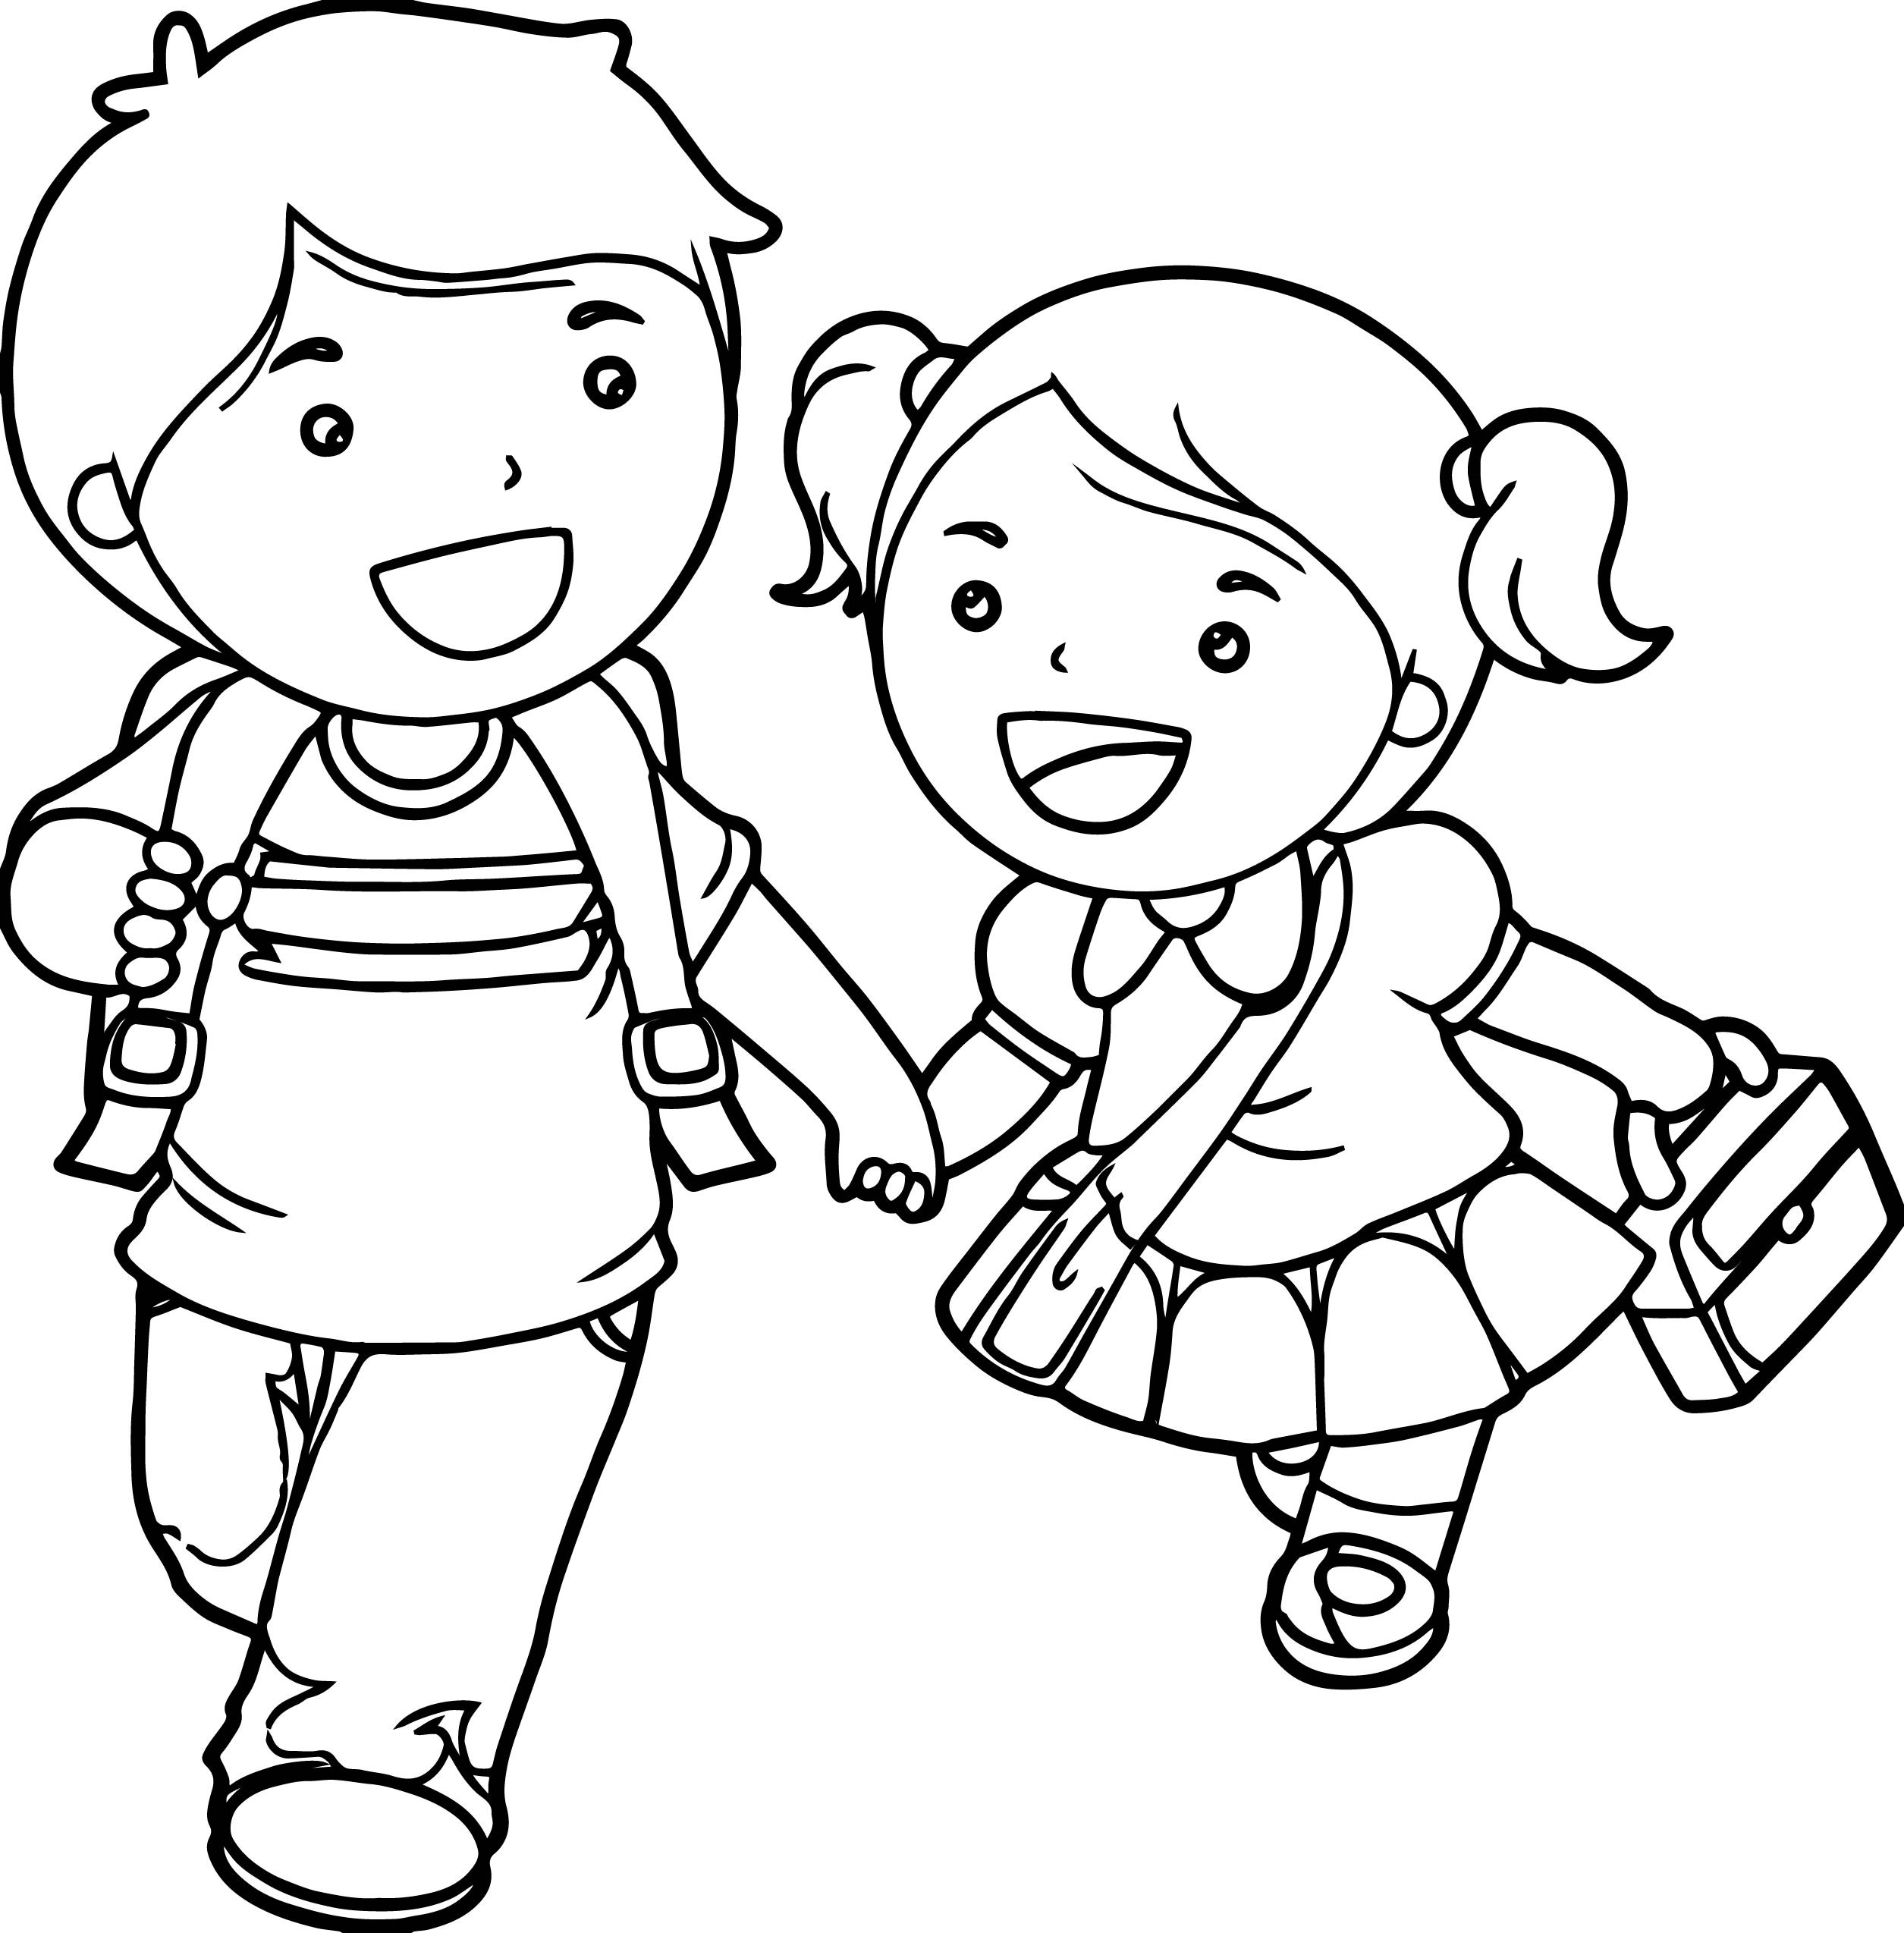 Coloring Sheets For Girls And Boys
 Fun Coloring Pages For Boys And Girls The Art Jinni